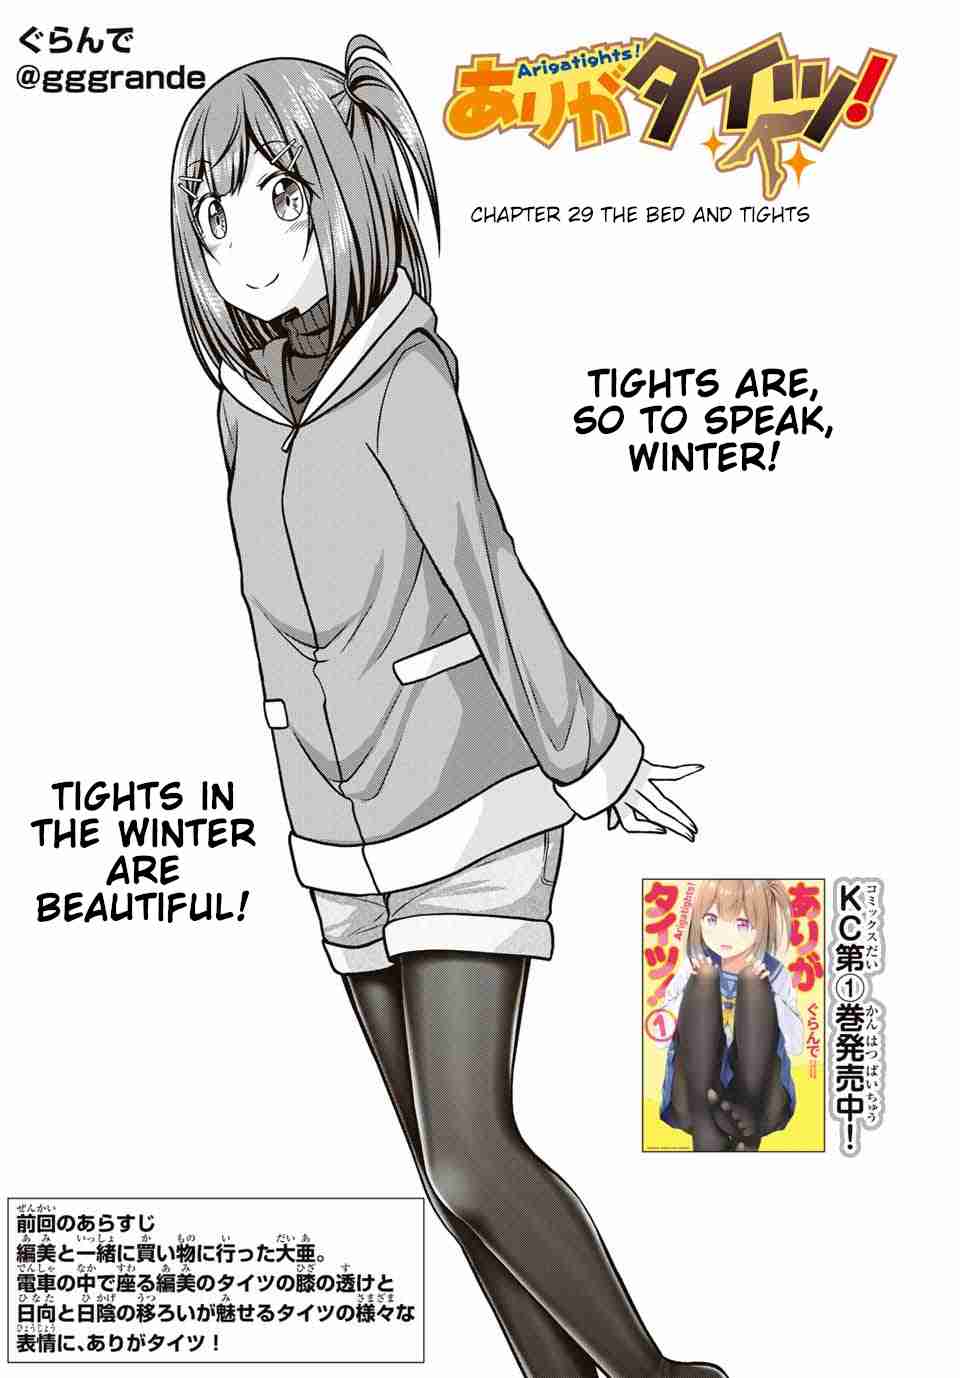 Arigatights! Vol. 2 Ch. 29 The Bed and Tights